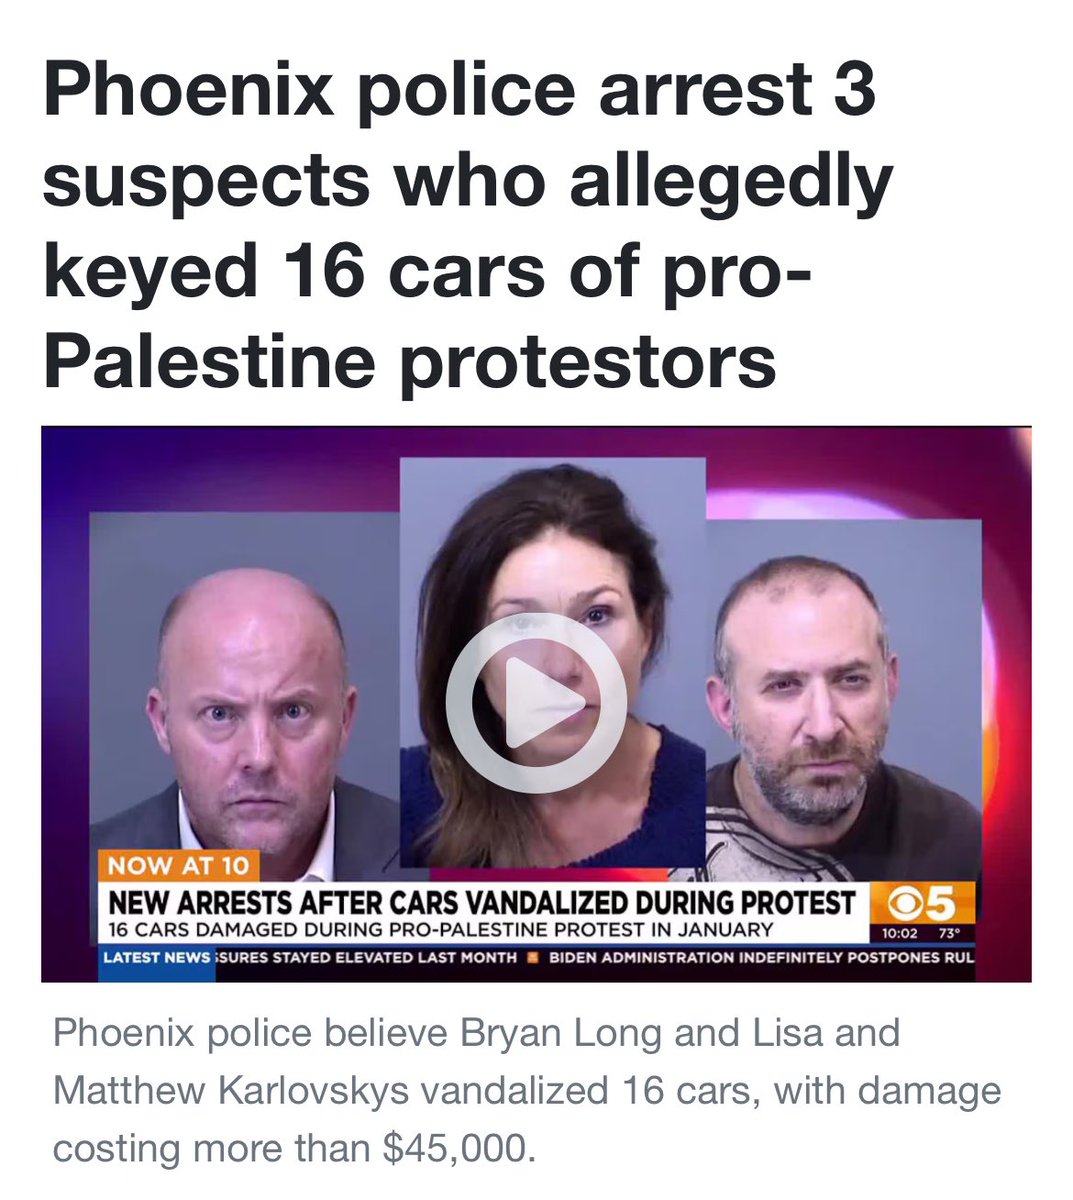 🚨 ARREST WATCH: In case you missed it, three alleged criminals were charged in connection with the vandalism of protestors’ cars in Arizona

🔴 Dr. Matthew Karlovsky, urologist at @DignityHealth

🔴 Bryan Long, CFO at Signature Dental Partners

🔴 Lisa Karlovsky